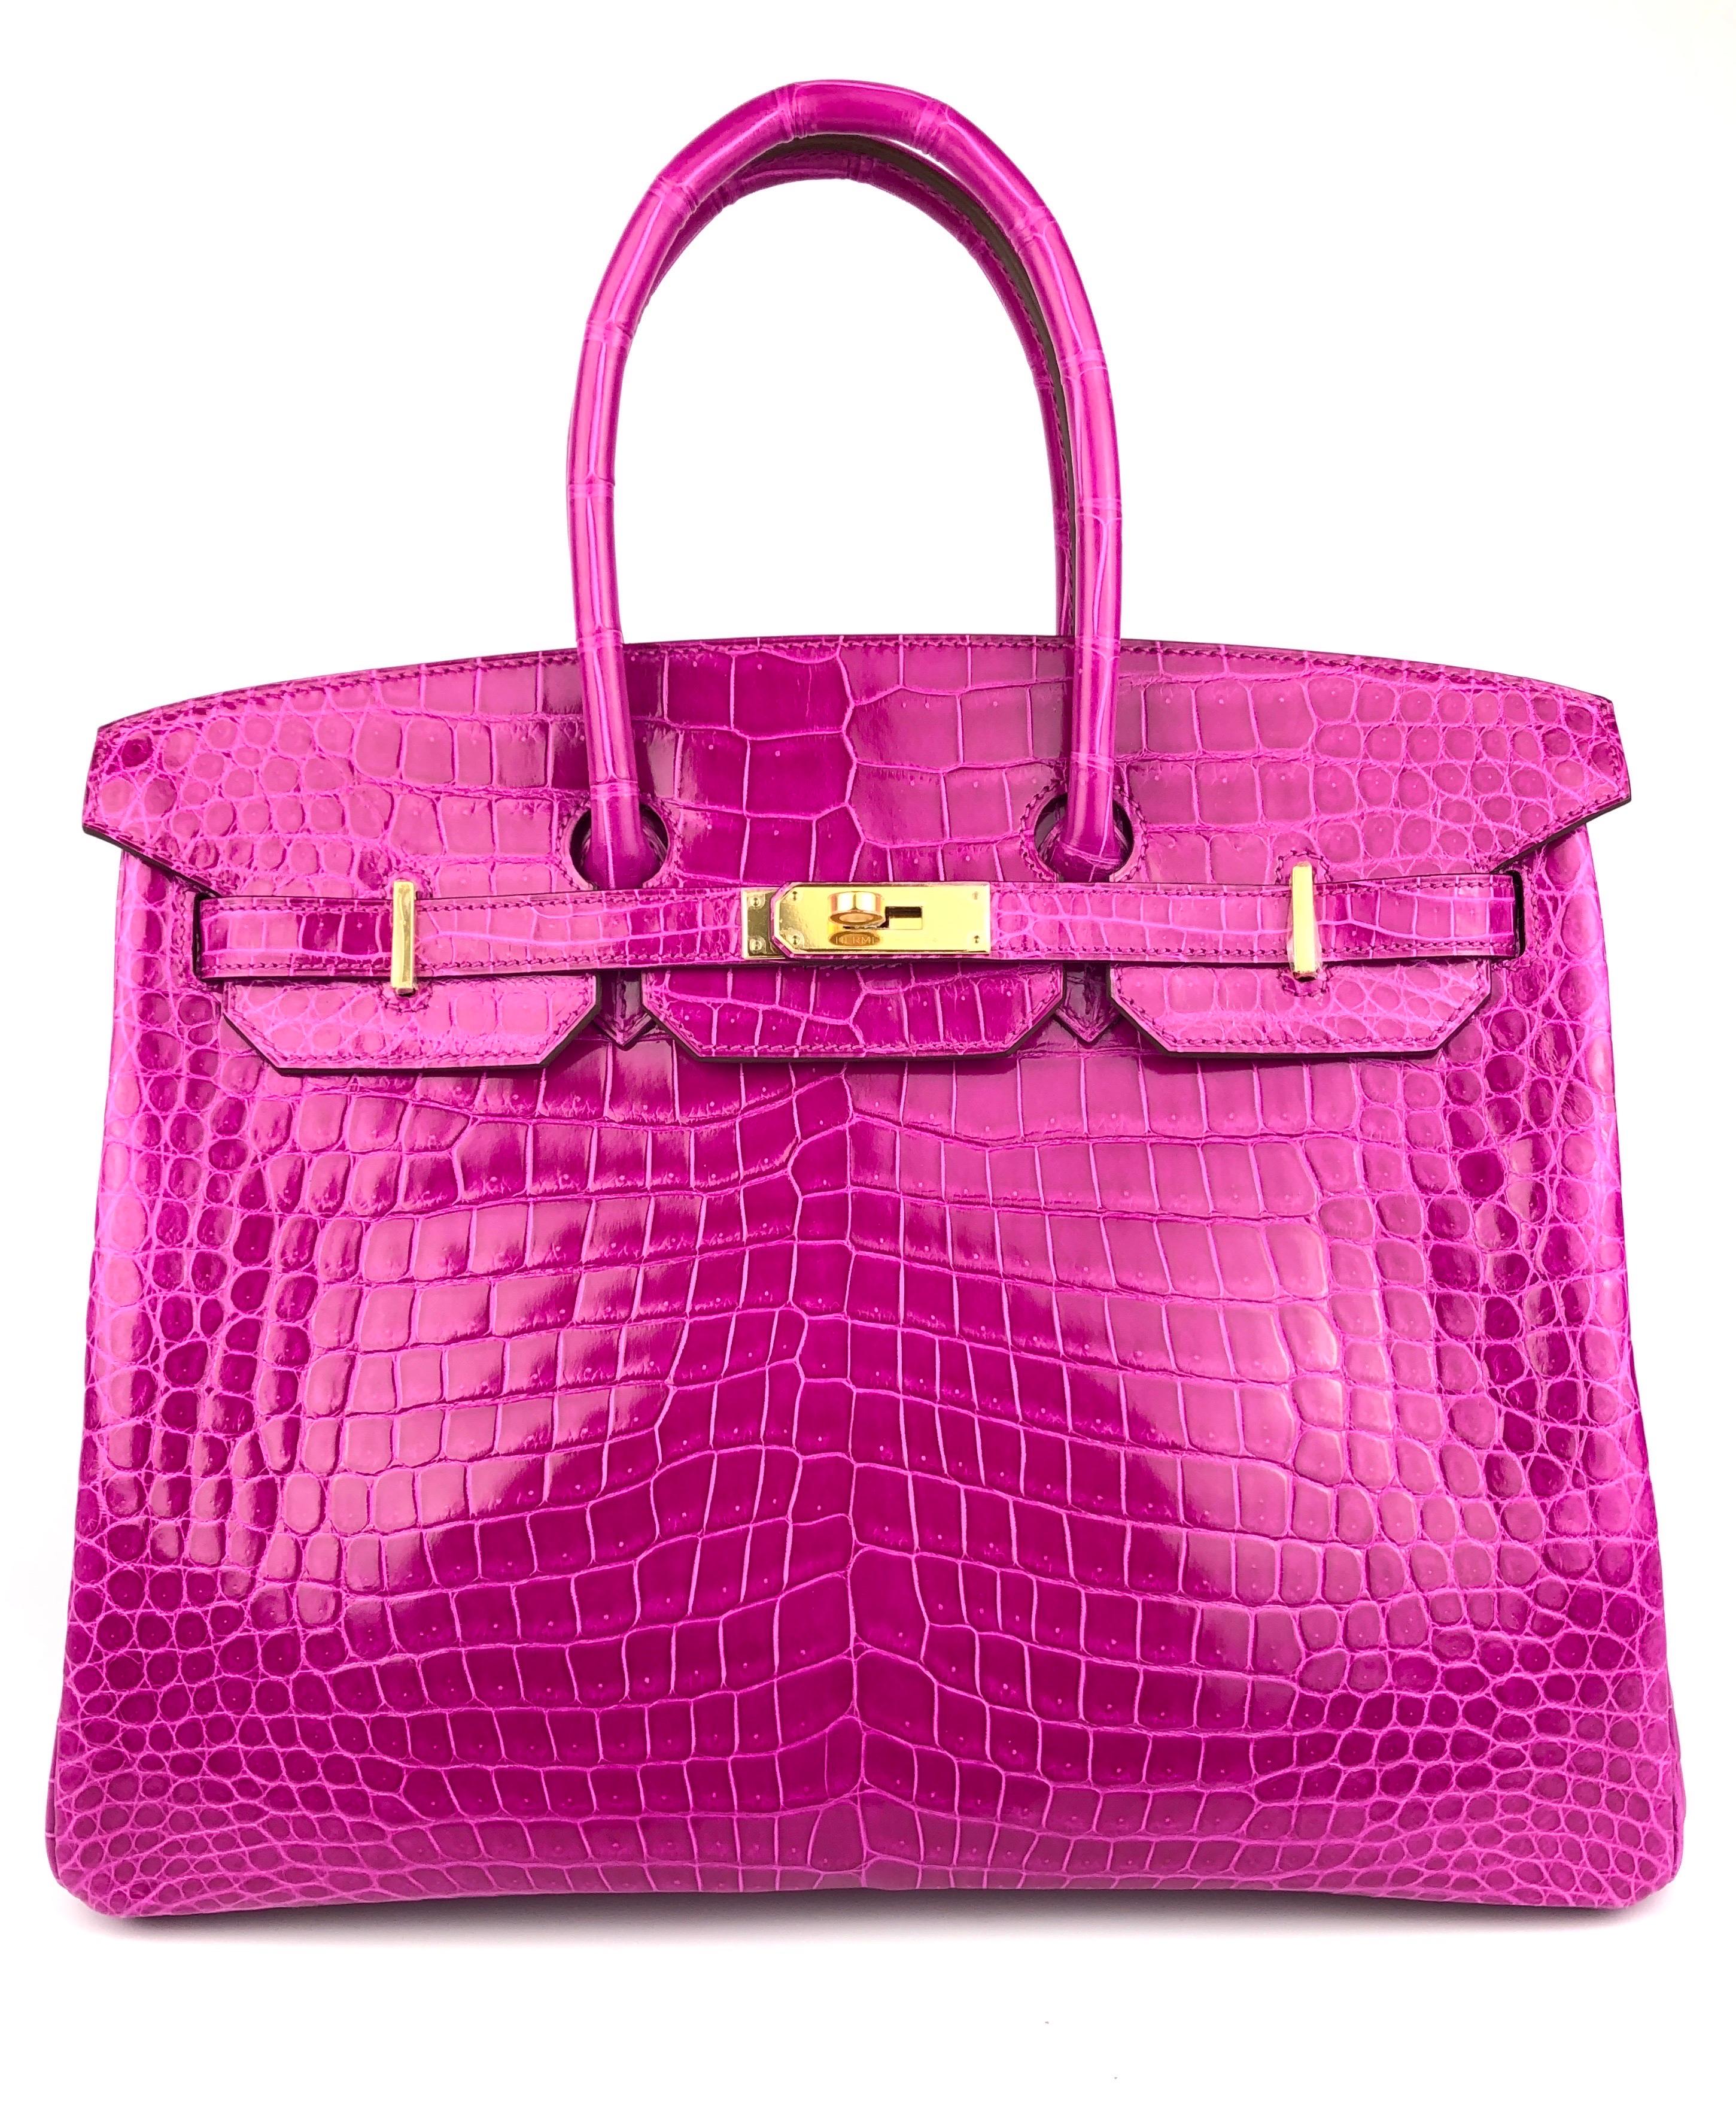 Absolutely Stunning RARE 
As New Hermes Birkin 35 Rose Scheherazade Pink Crocodile Skin Leather Gold Hardware. Plastic on all hardware and feet. 2016 X Stamp.
BEST PRICE ON THE MARKET! 

Shop with Confidence from Lux Addicts. Authenticity